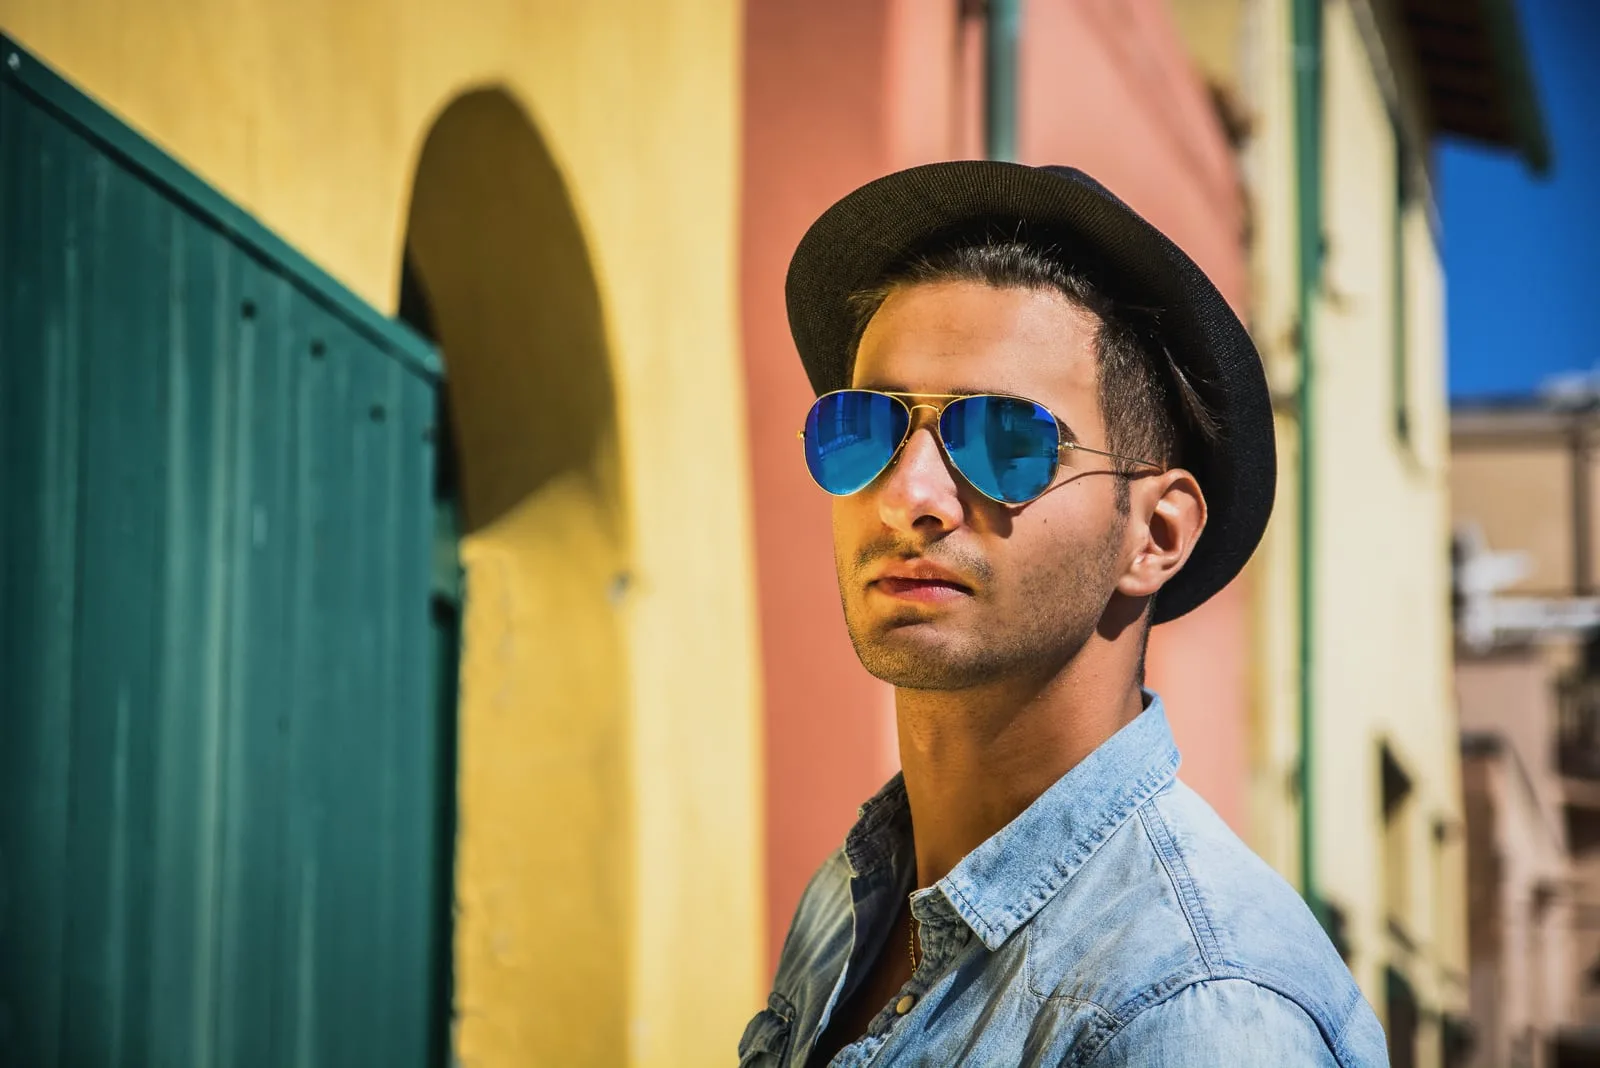 dark haired young man wearing blue sunglasses